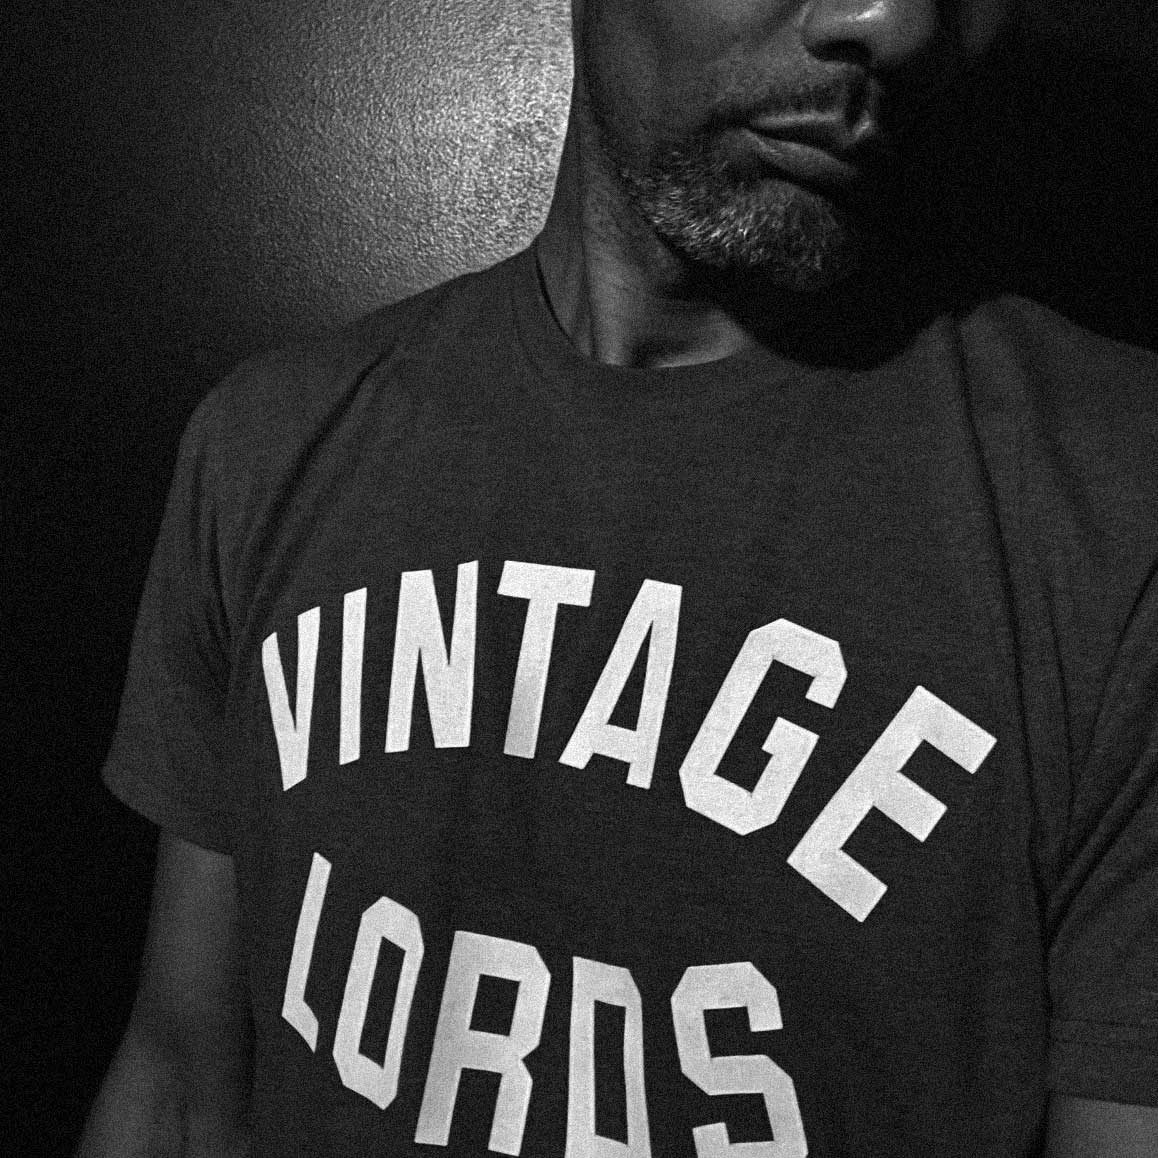 Man wearing dark t-shirt with Vintage Lords name on chest